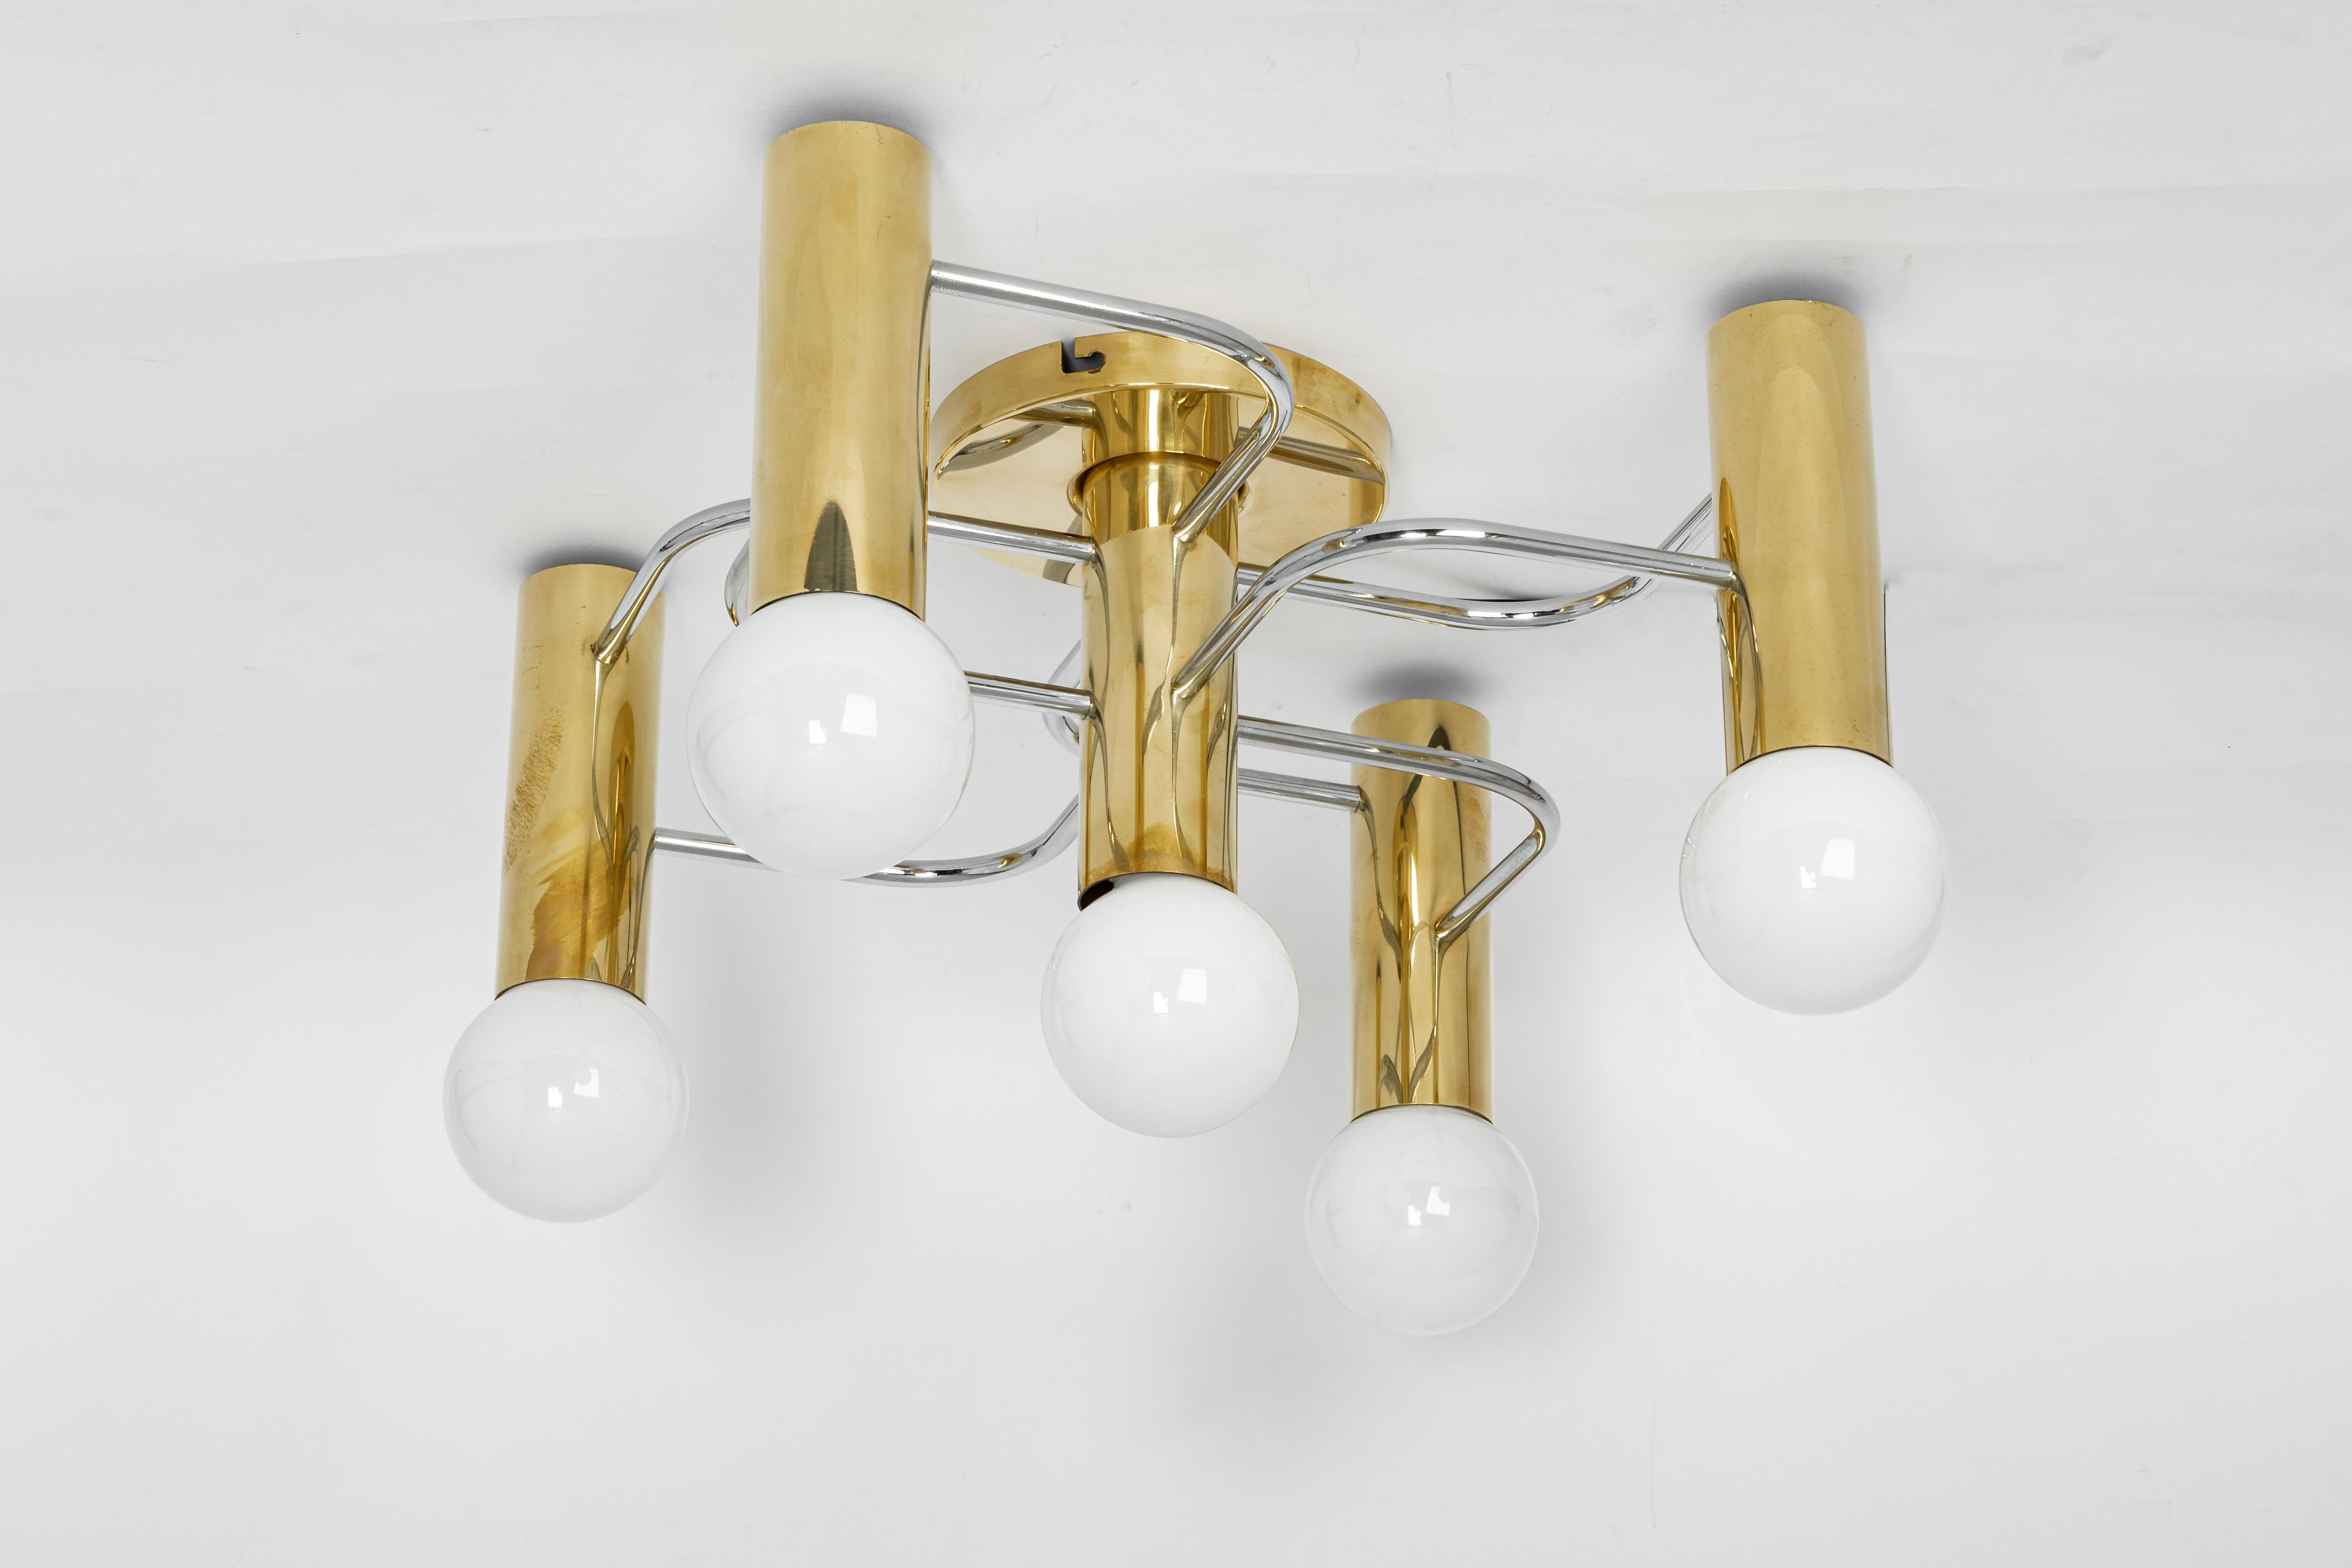 Stunning five-light flush mount light fixture in bi-color brass and chrome can be used as wall or ceiling light.

Sockets: 5 x E27 standard bulbs - max 60 watts each
Light bulbs are not included. It is possible to install this fixture in all